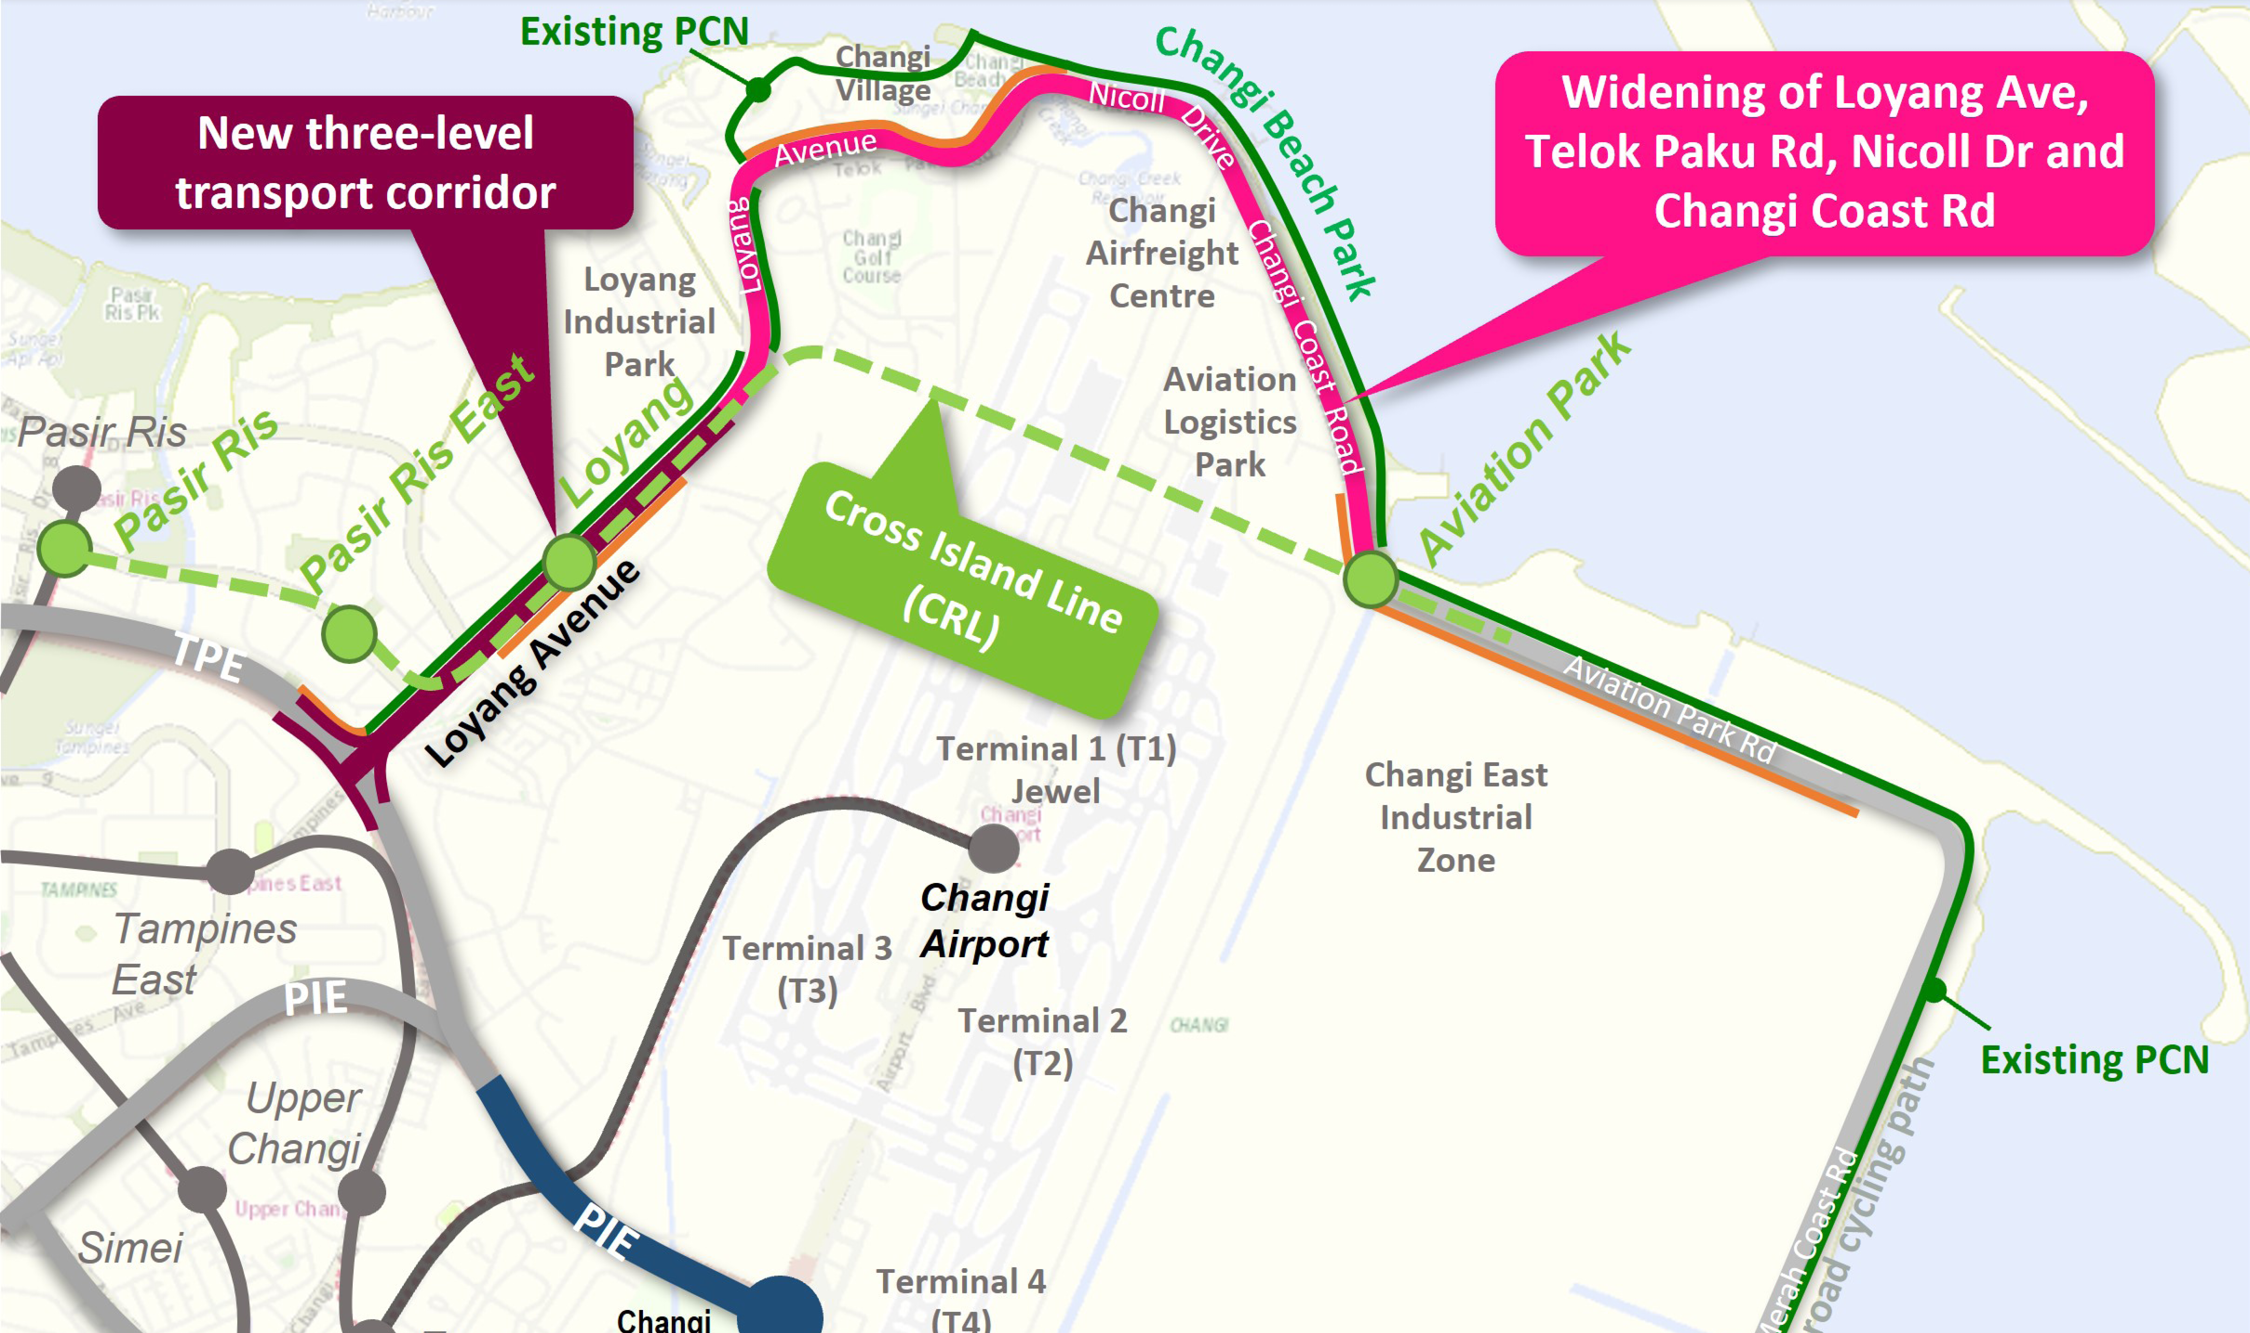 This is a map depicting the Changi Northern Corridor map